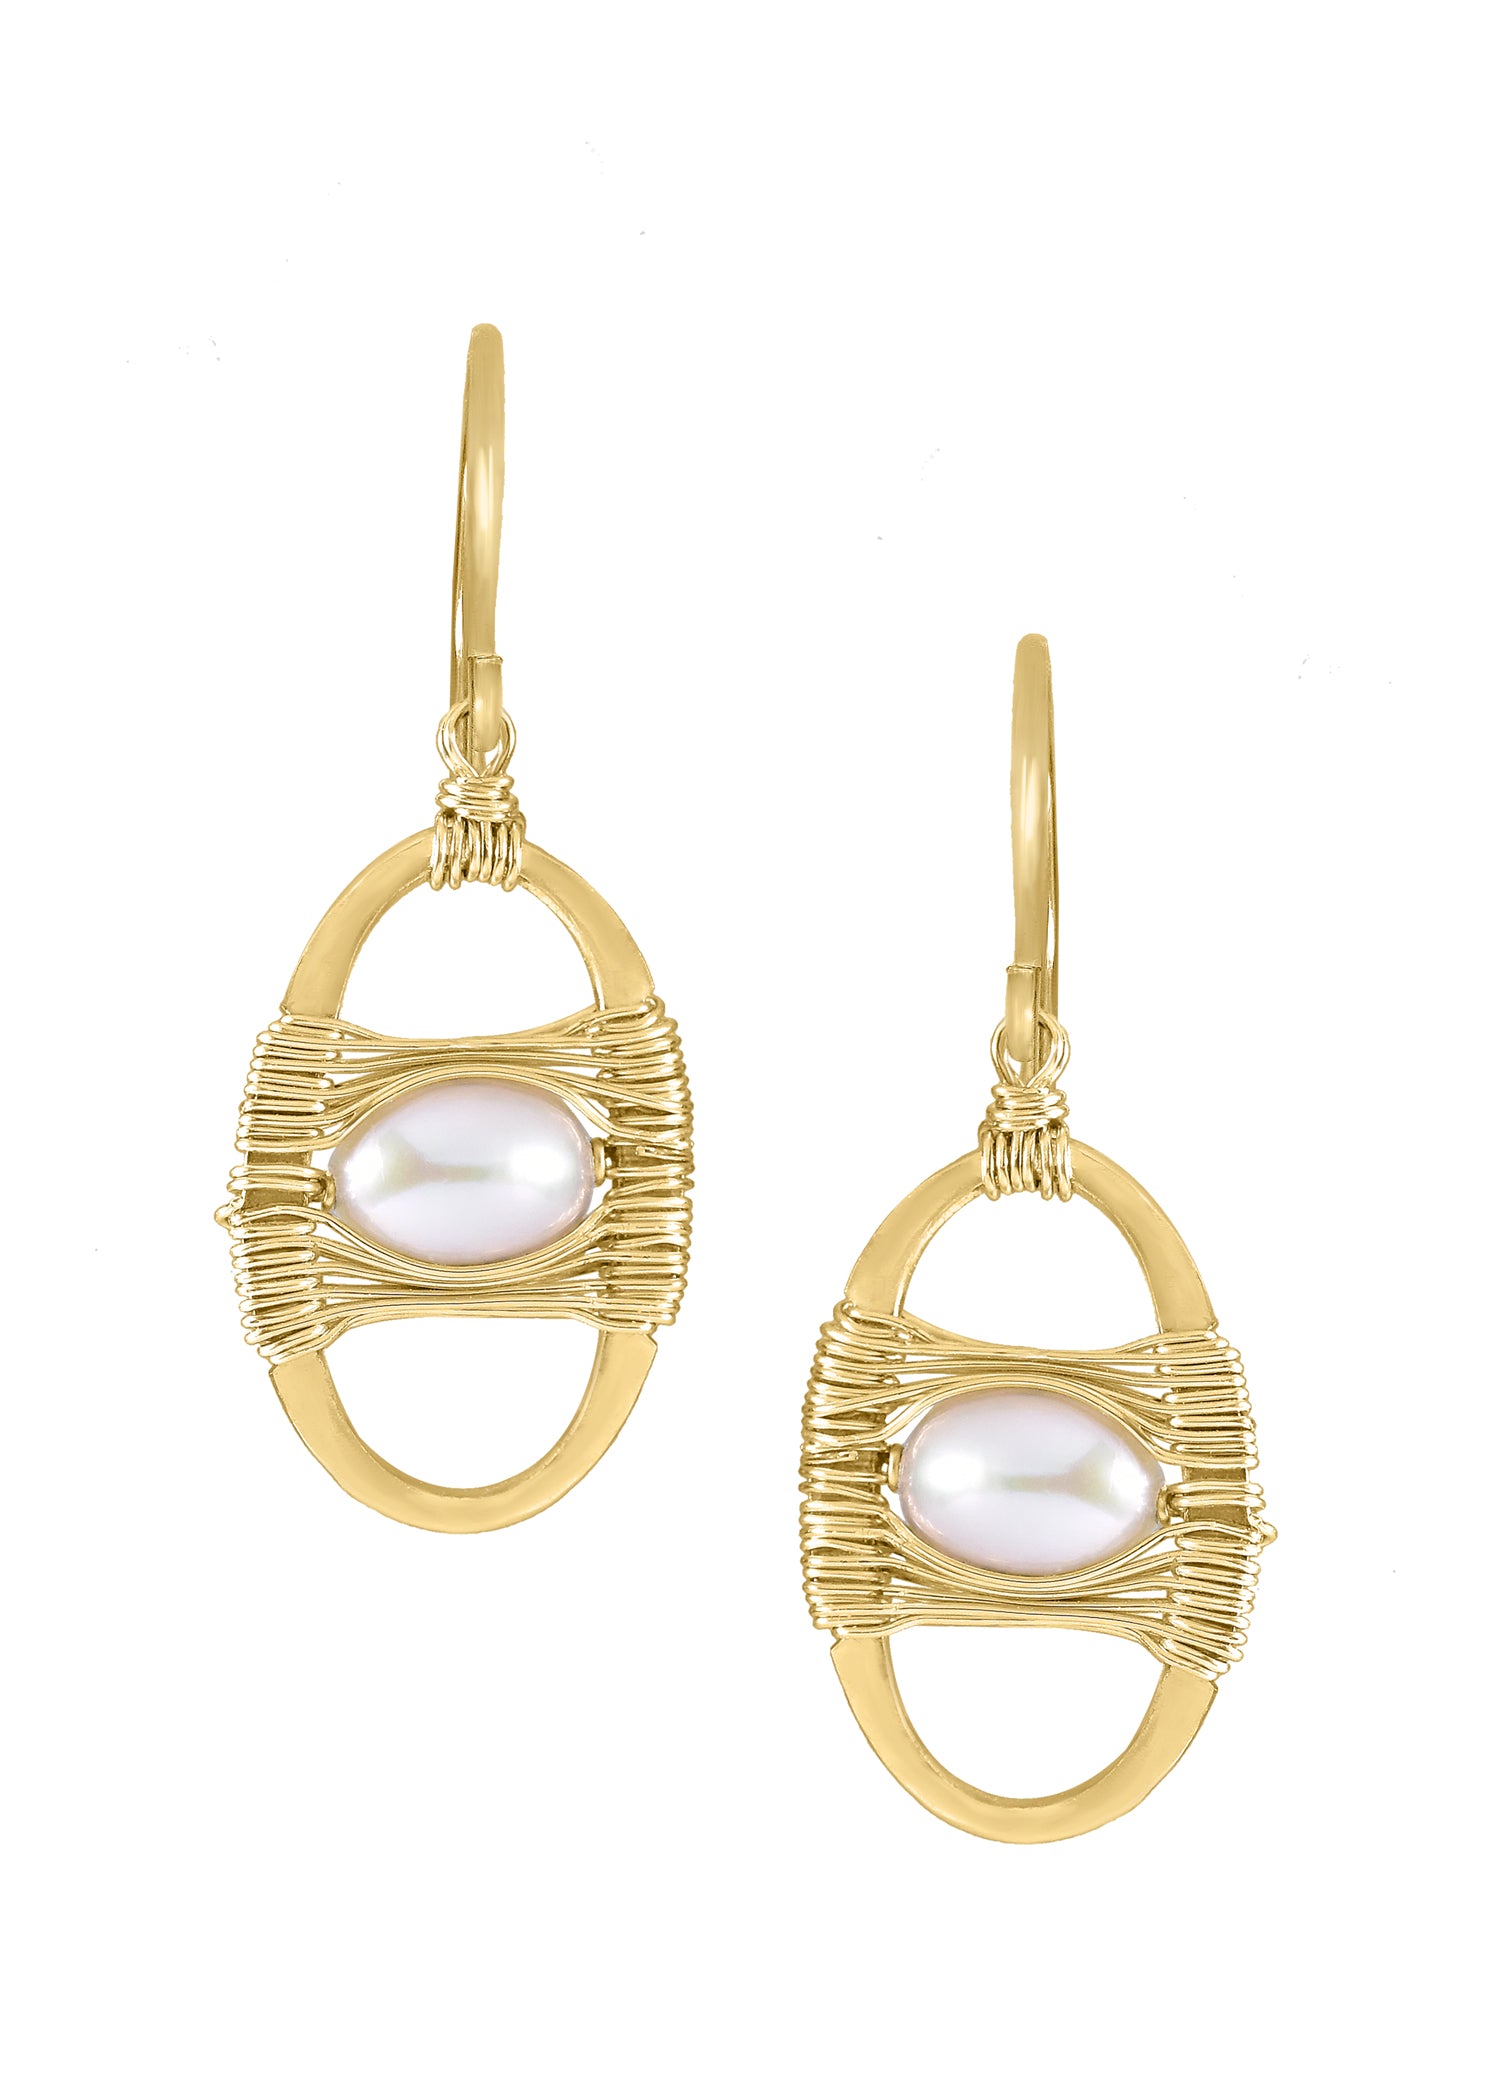 Freshwater pearl 14k gold fill Earrings measure 1-1/8" in length (including the ear wires) and 7/16" in width at the widest point Handmade in our Los Angeles studio